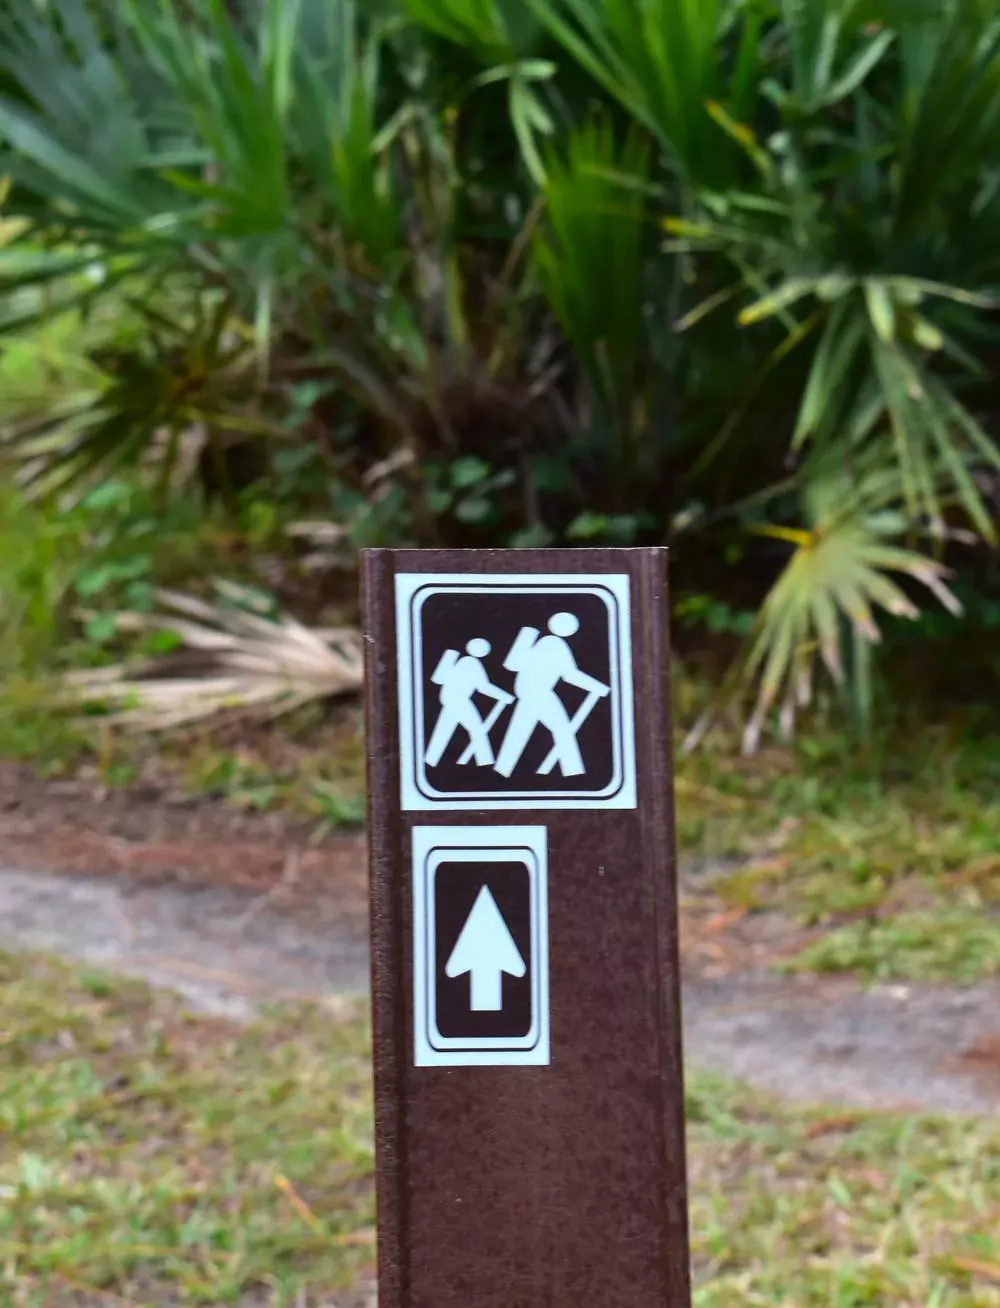 An image of hiking trail signage